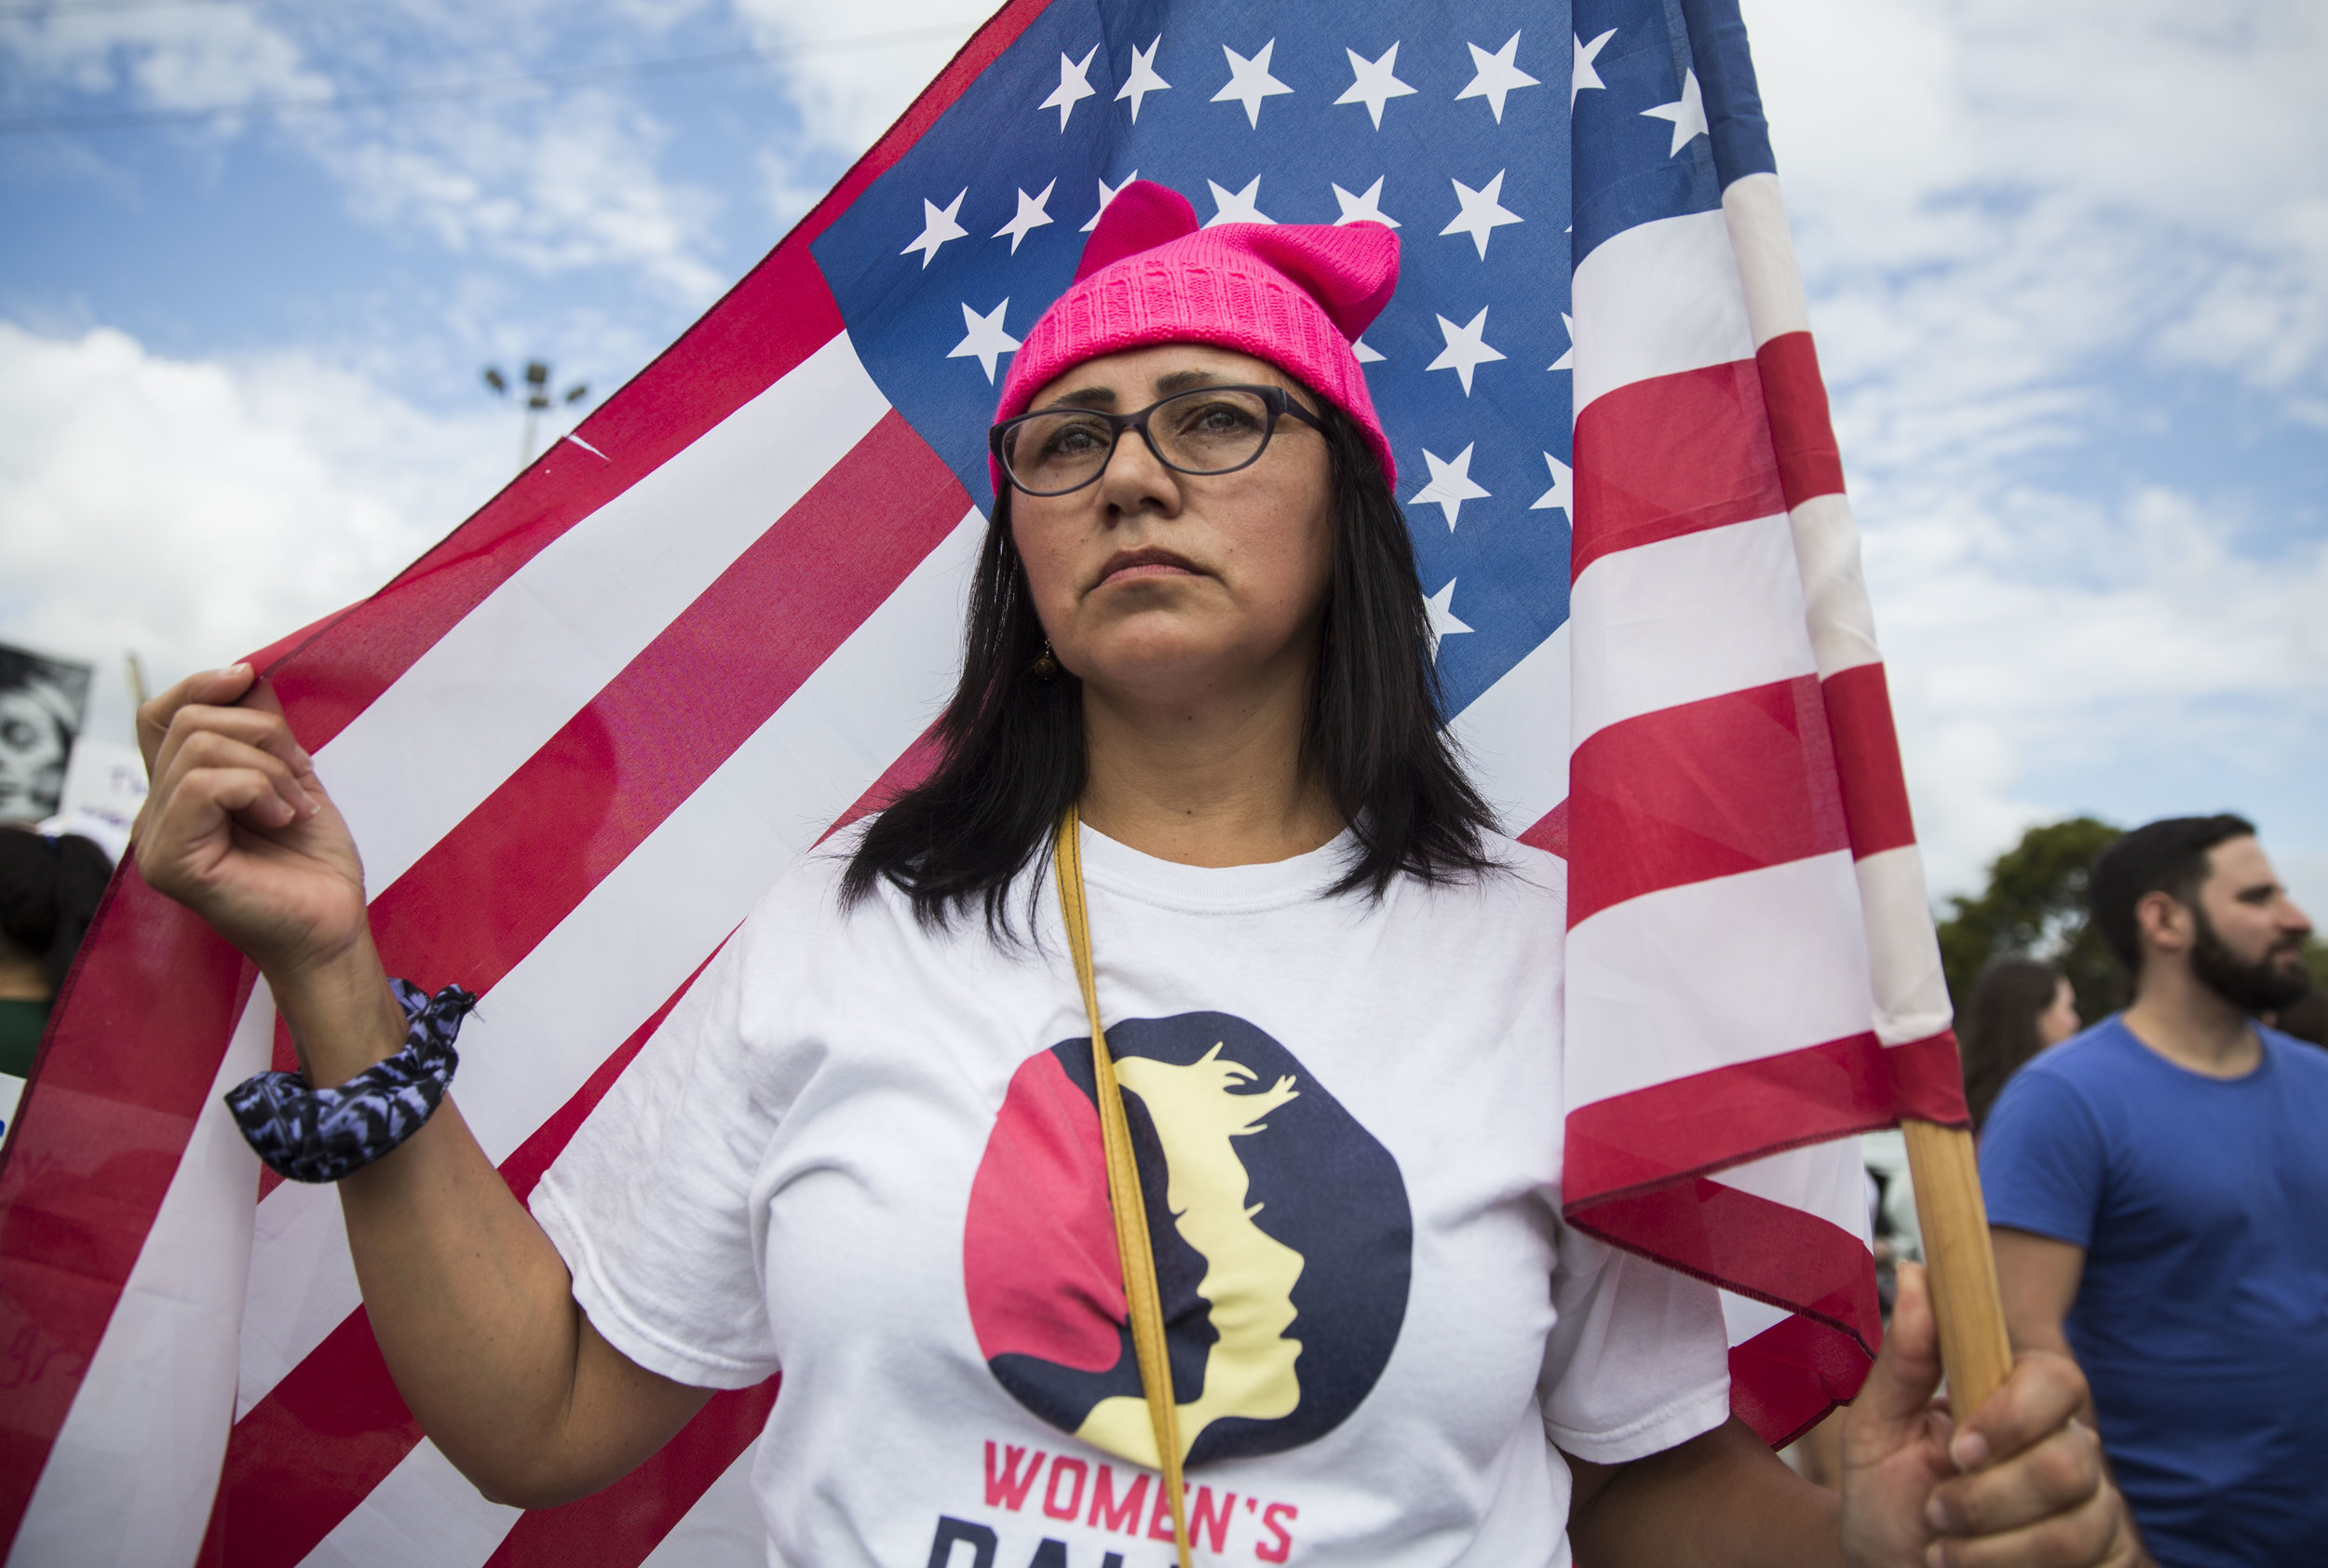  Vivian Ivalo, 50, who is originally from Argentina but now lives in Miami stands with an American flag during the Women's March Florida at Mana Wynwood in Miami on Jan. 21, 2018. "I attended this because I feel empowered by the people around me," sa